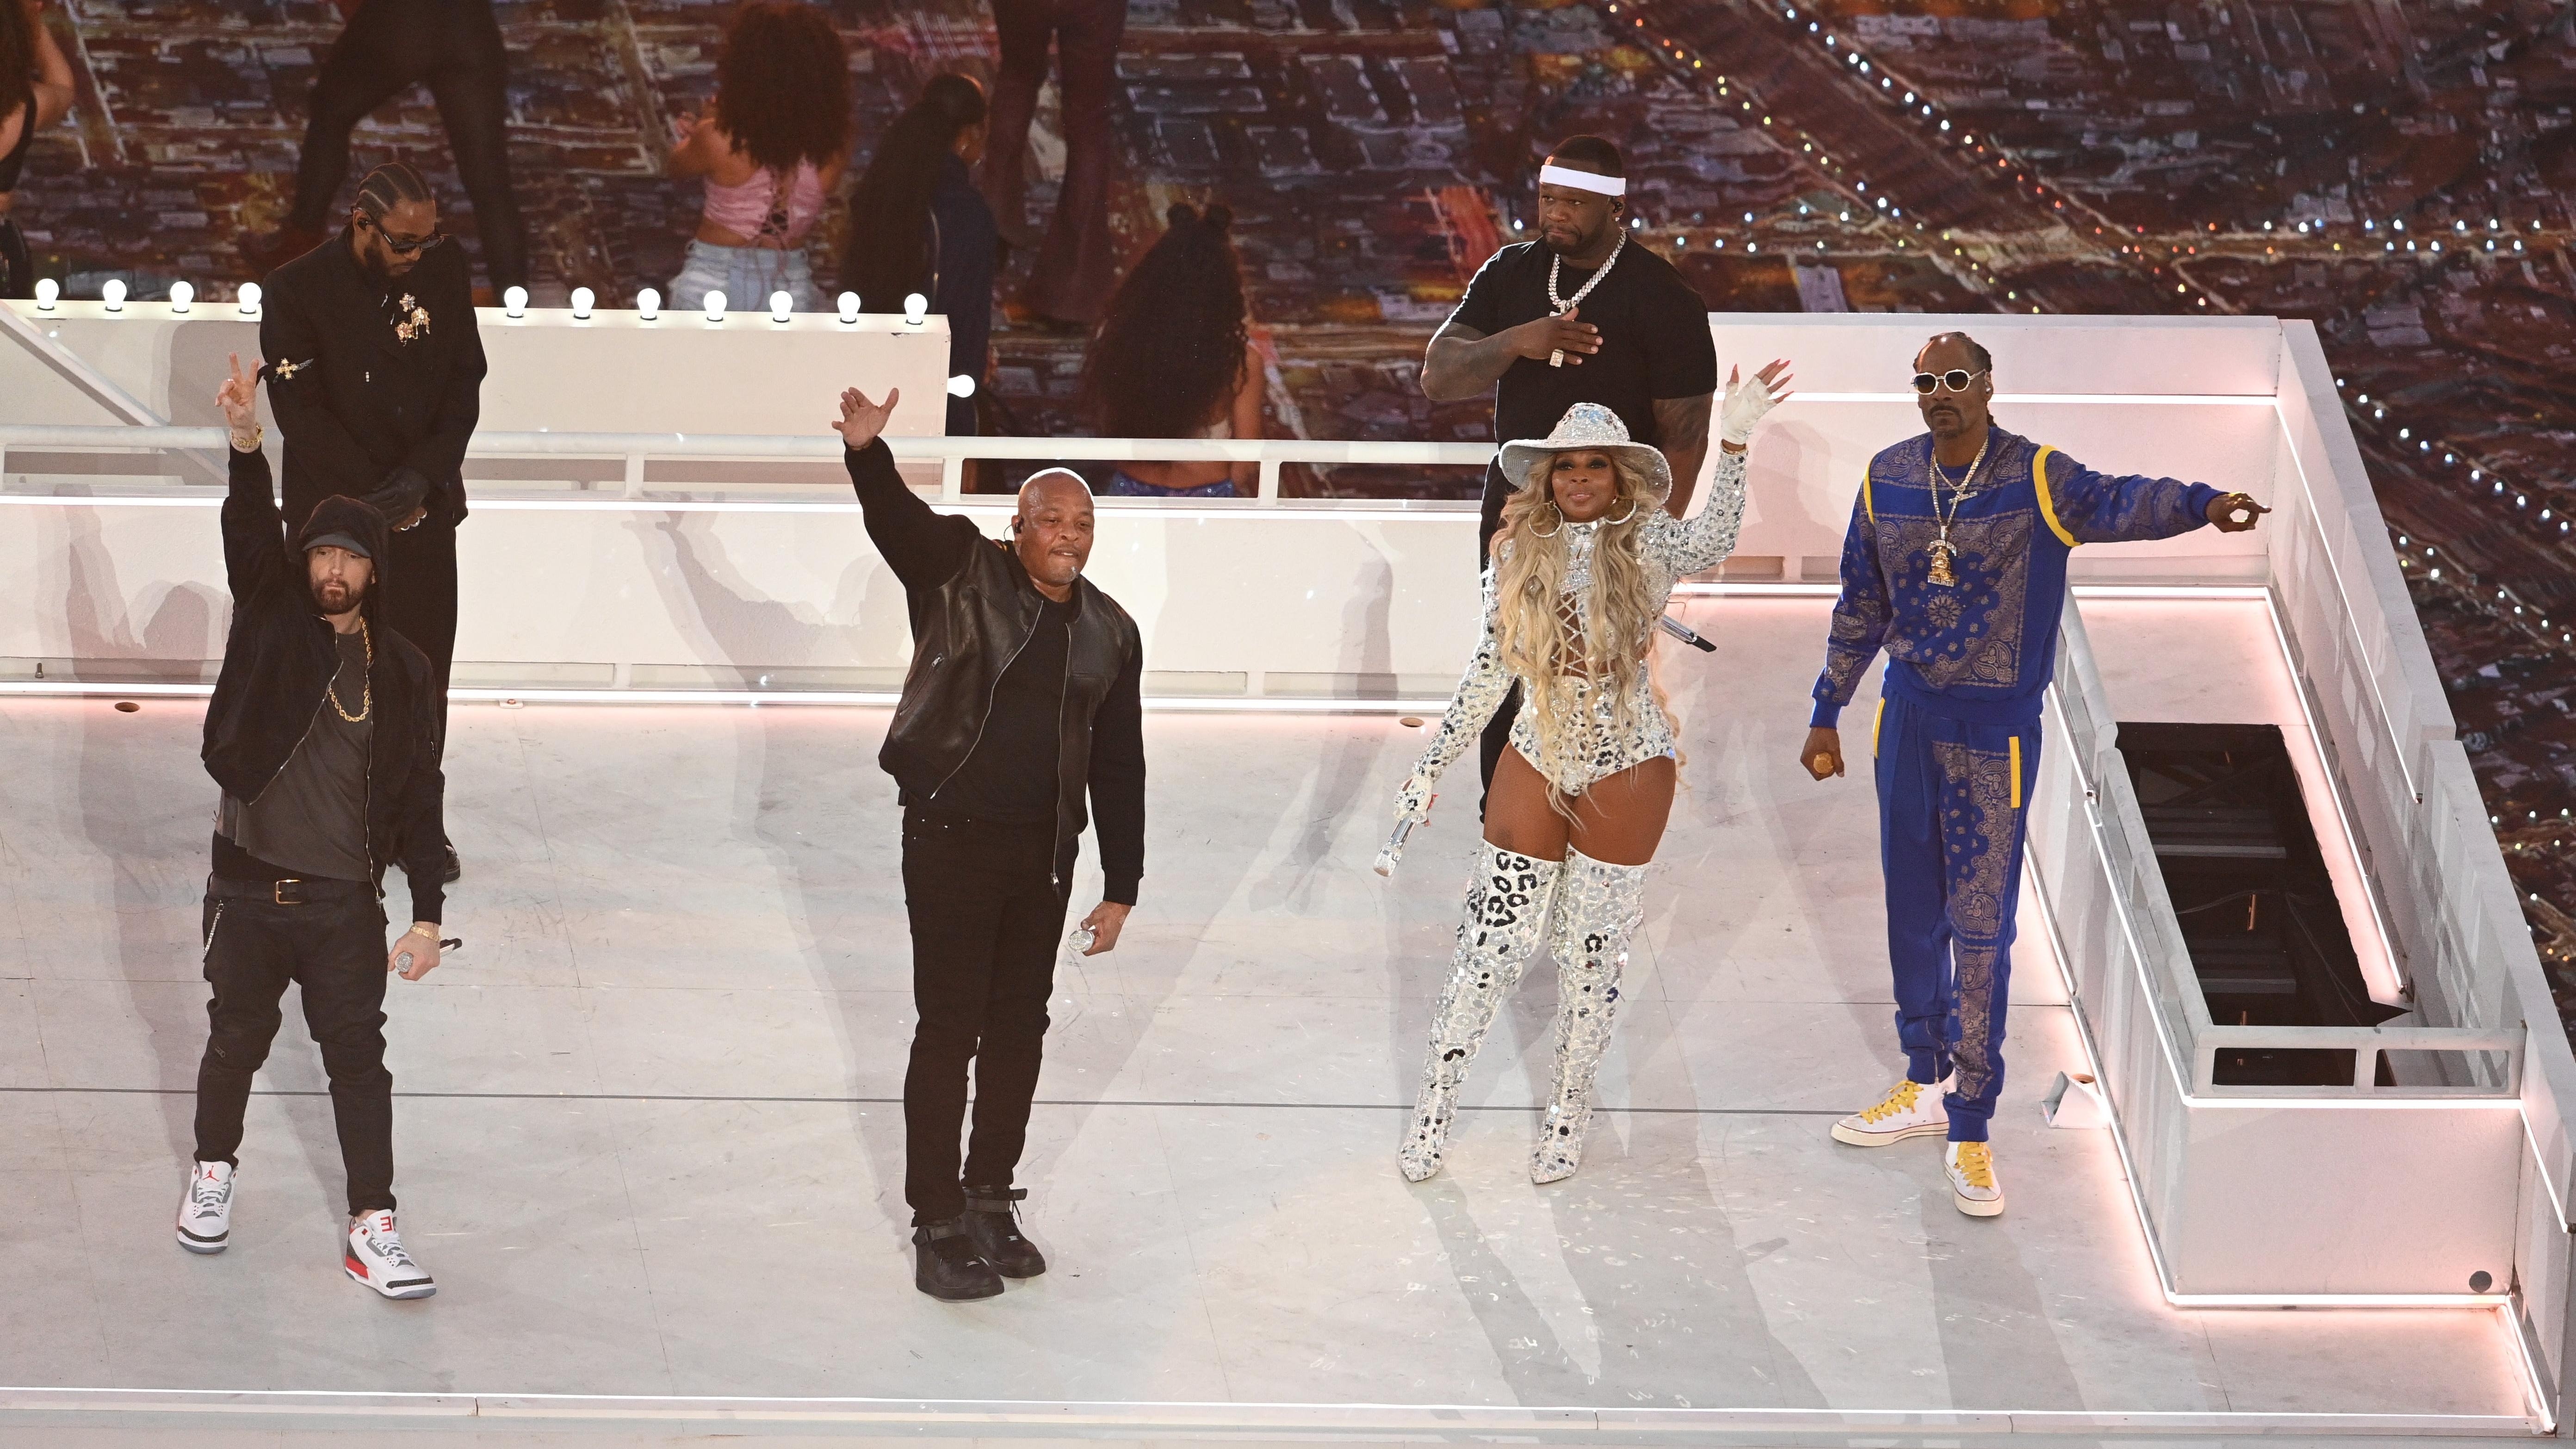 Dr. Dre, Snoop Dogg, and company deliver on “best ever” Super Bowl Halftime show